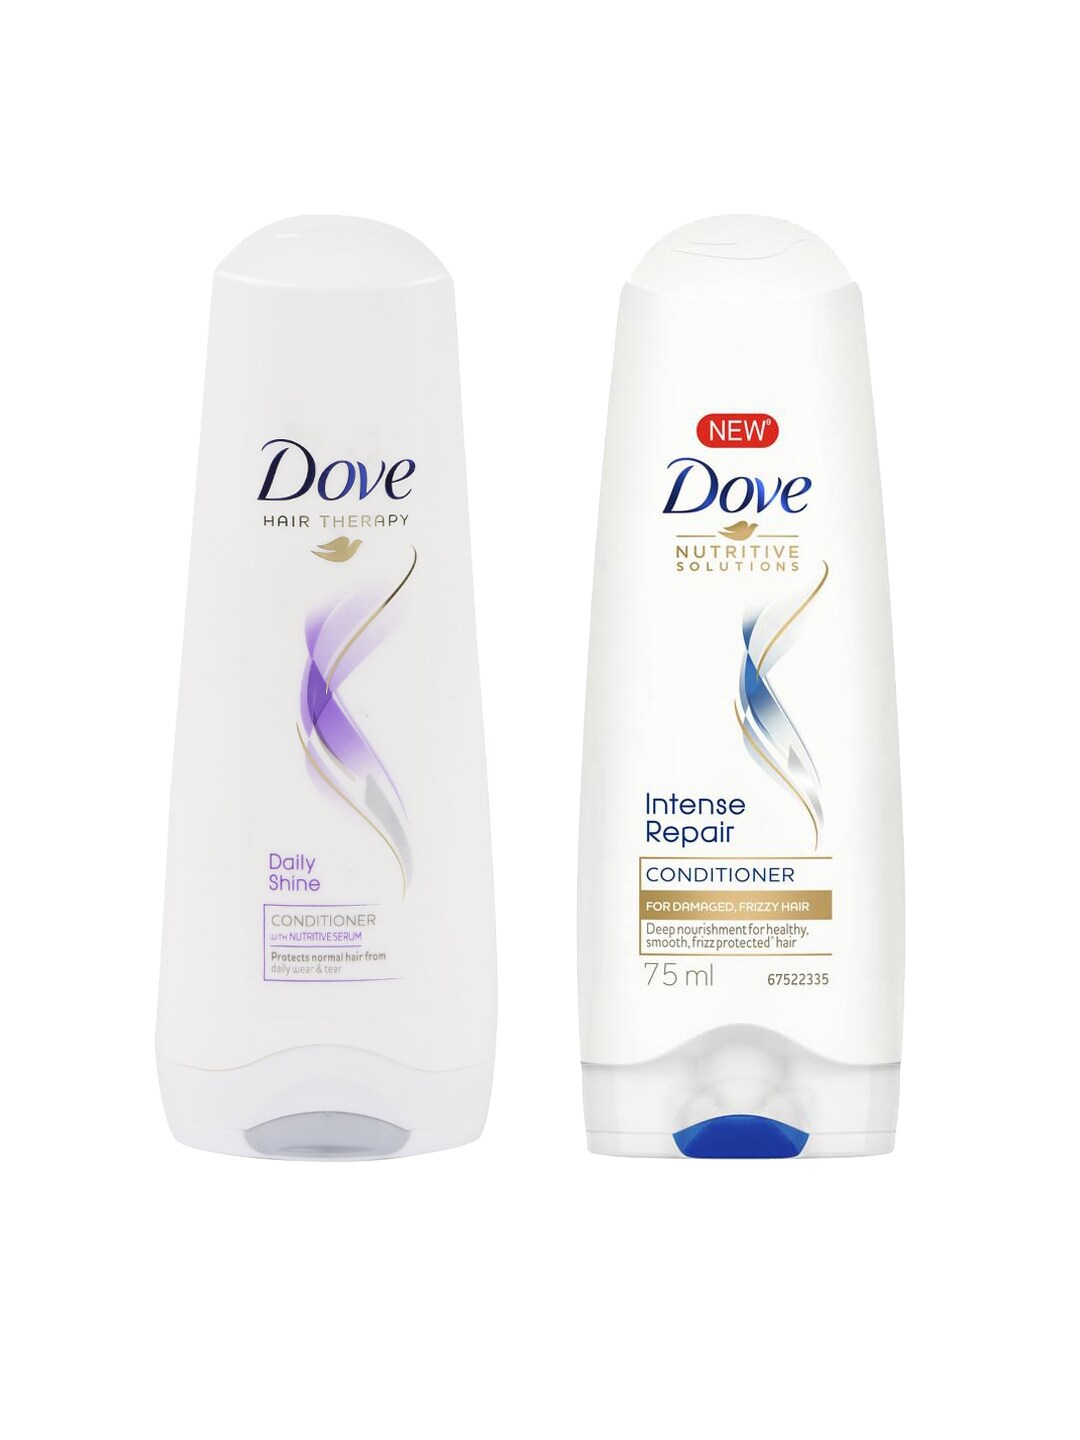 Dove  Hair Therapy Daily Shine Conditioner & Unisex Intense Repair Conditioner Price in India